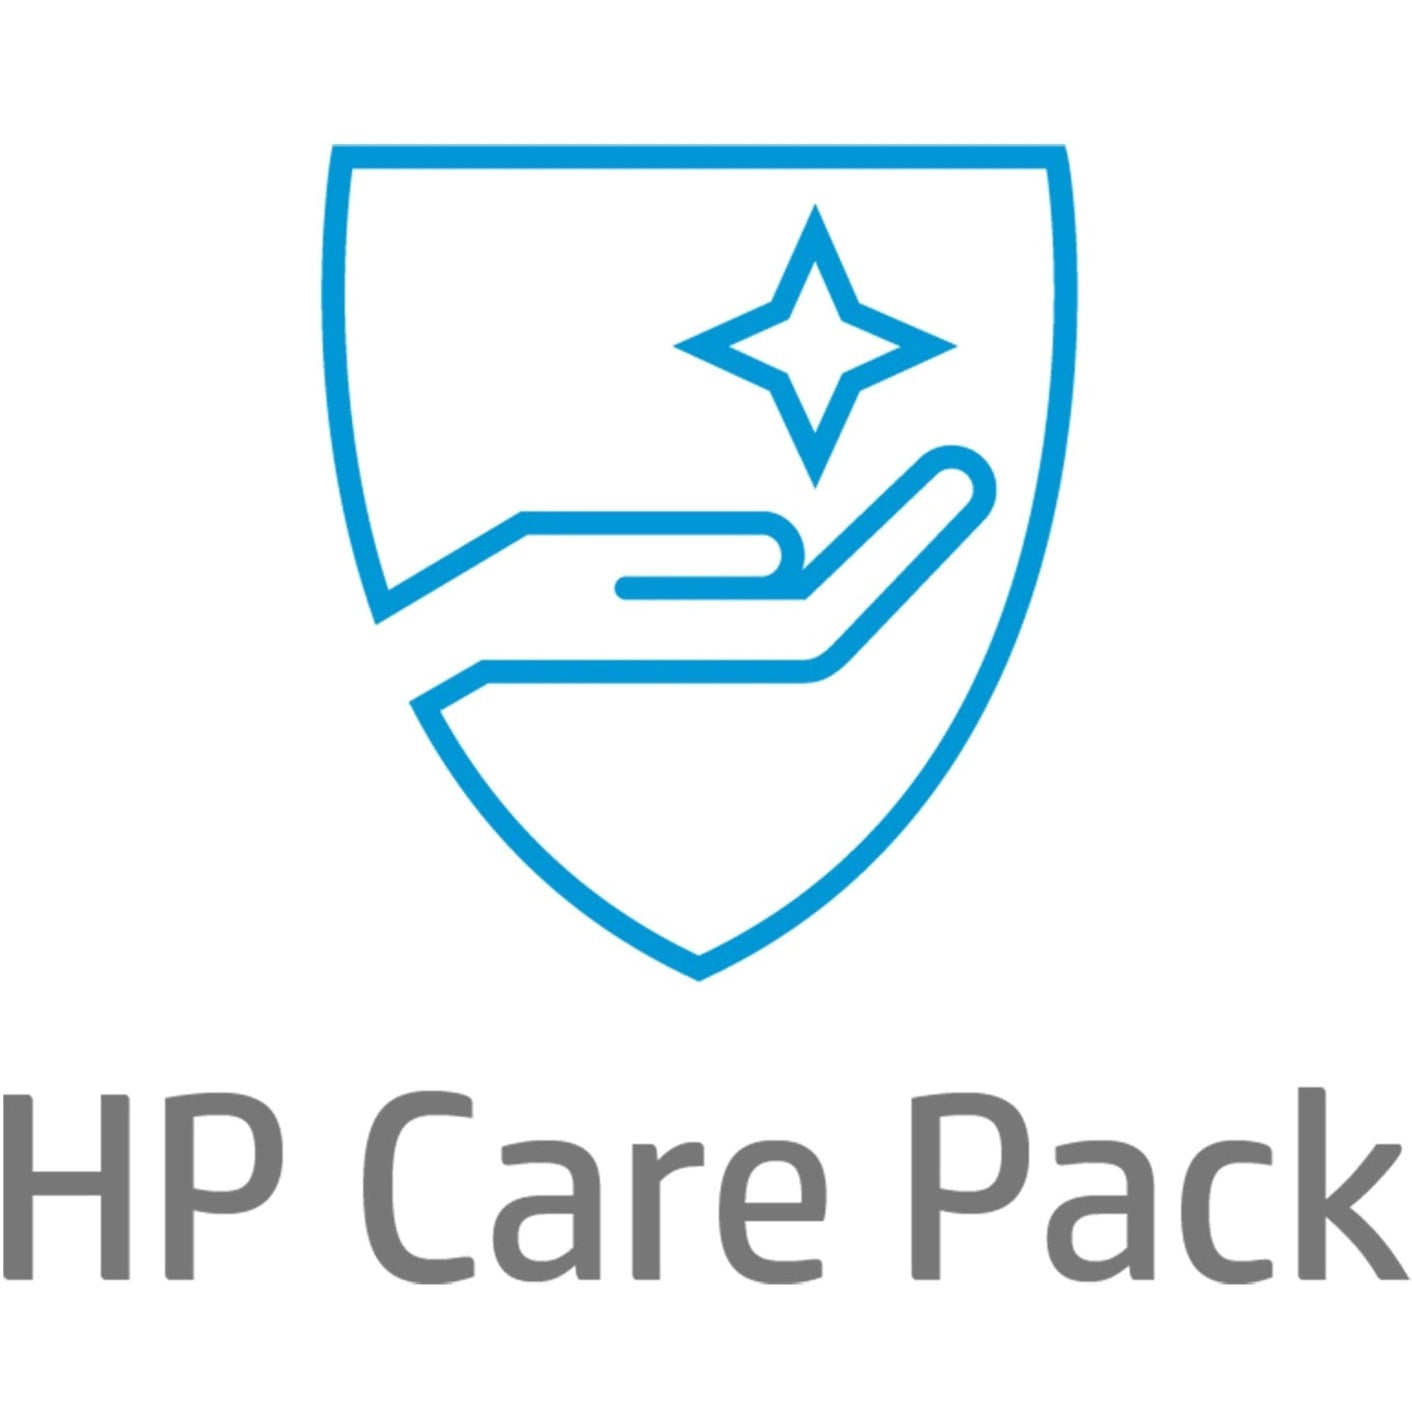 HP Care Pack - Extended Service - 3 Year - Service (UN013E)